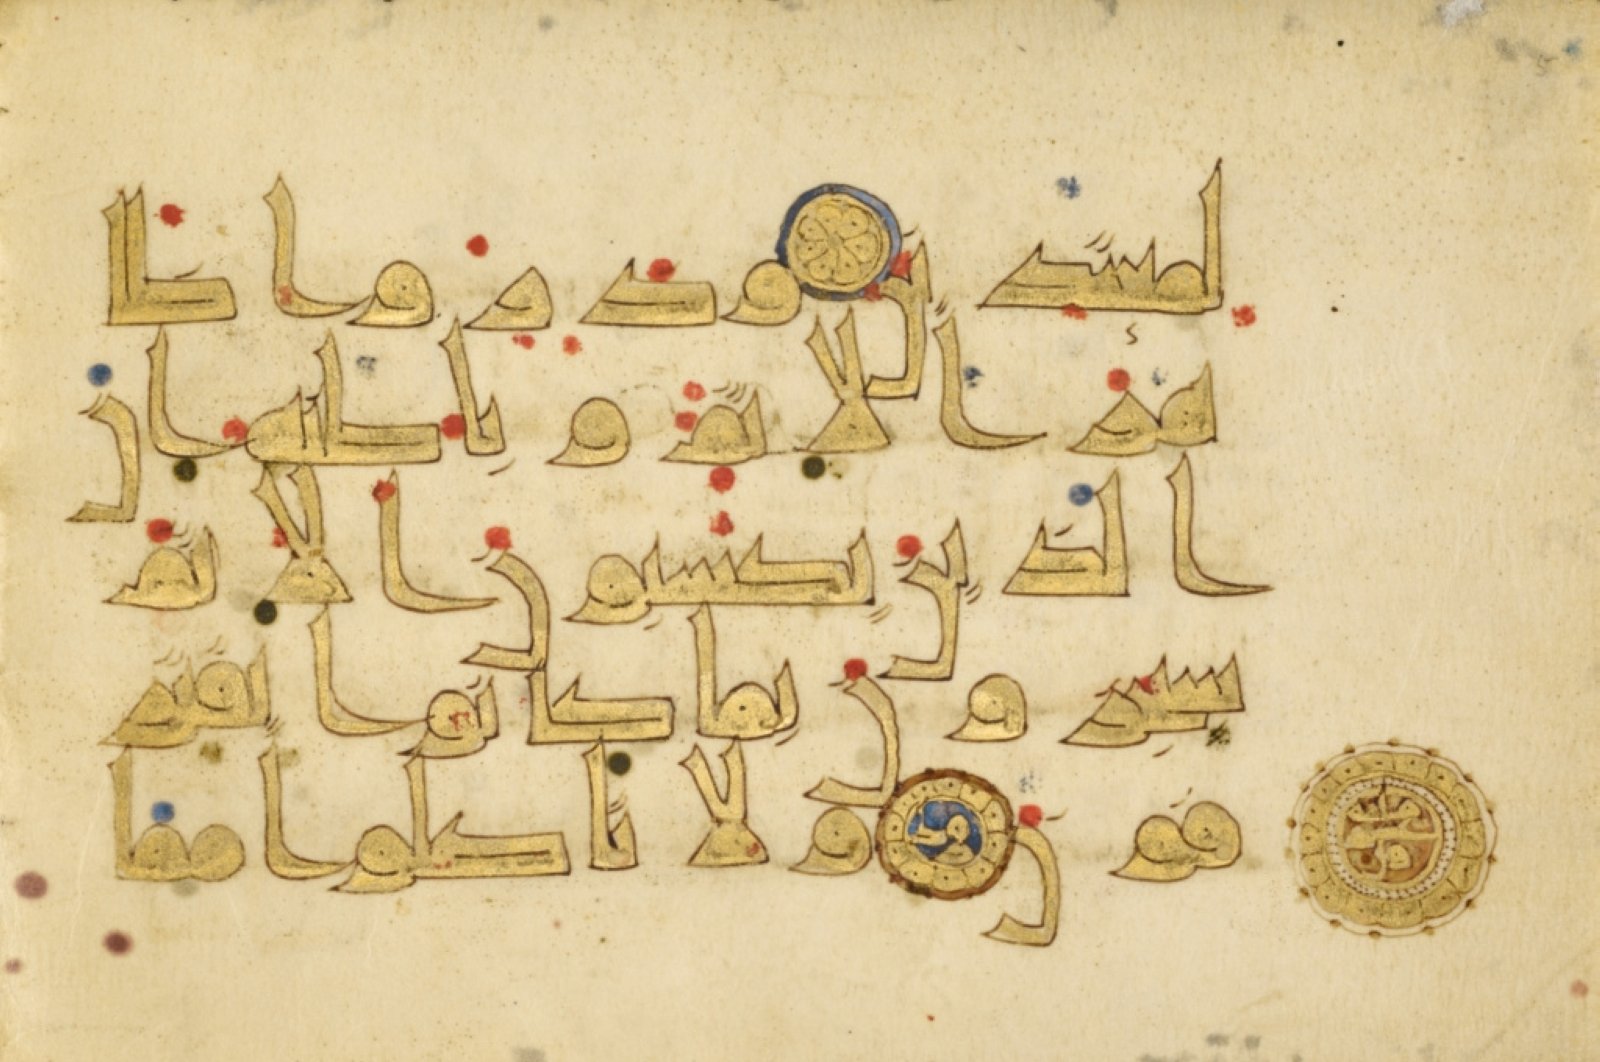 "Fragmentary Qur’an," ninth century, pen and ink, gold paint, and tempera colors, 14.4 by 20.8 centimeters. (Courtesy of Getty Museum)